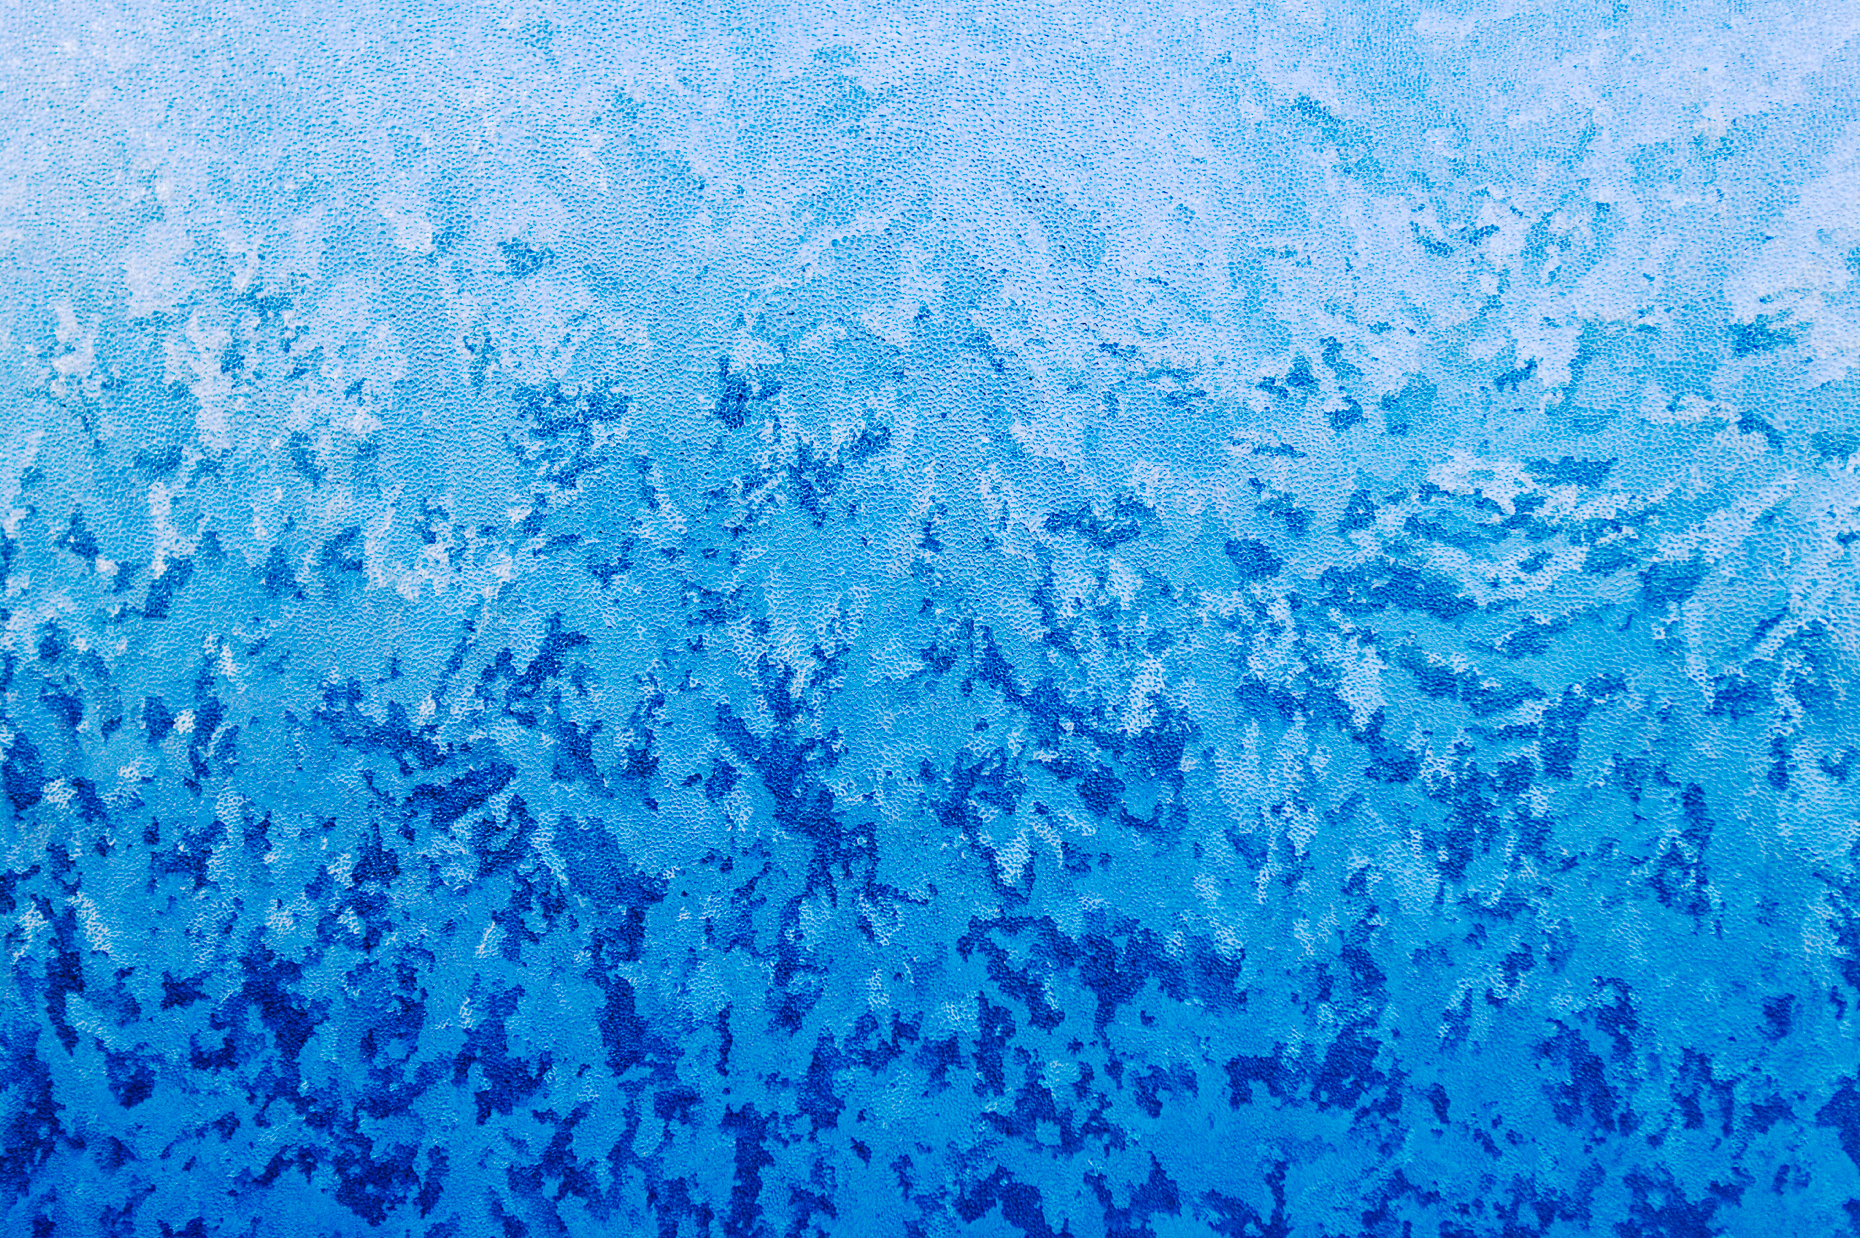 Ice patterns on a frosted window